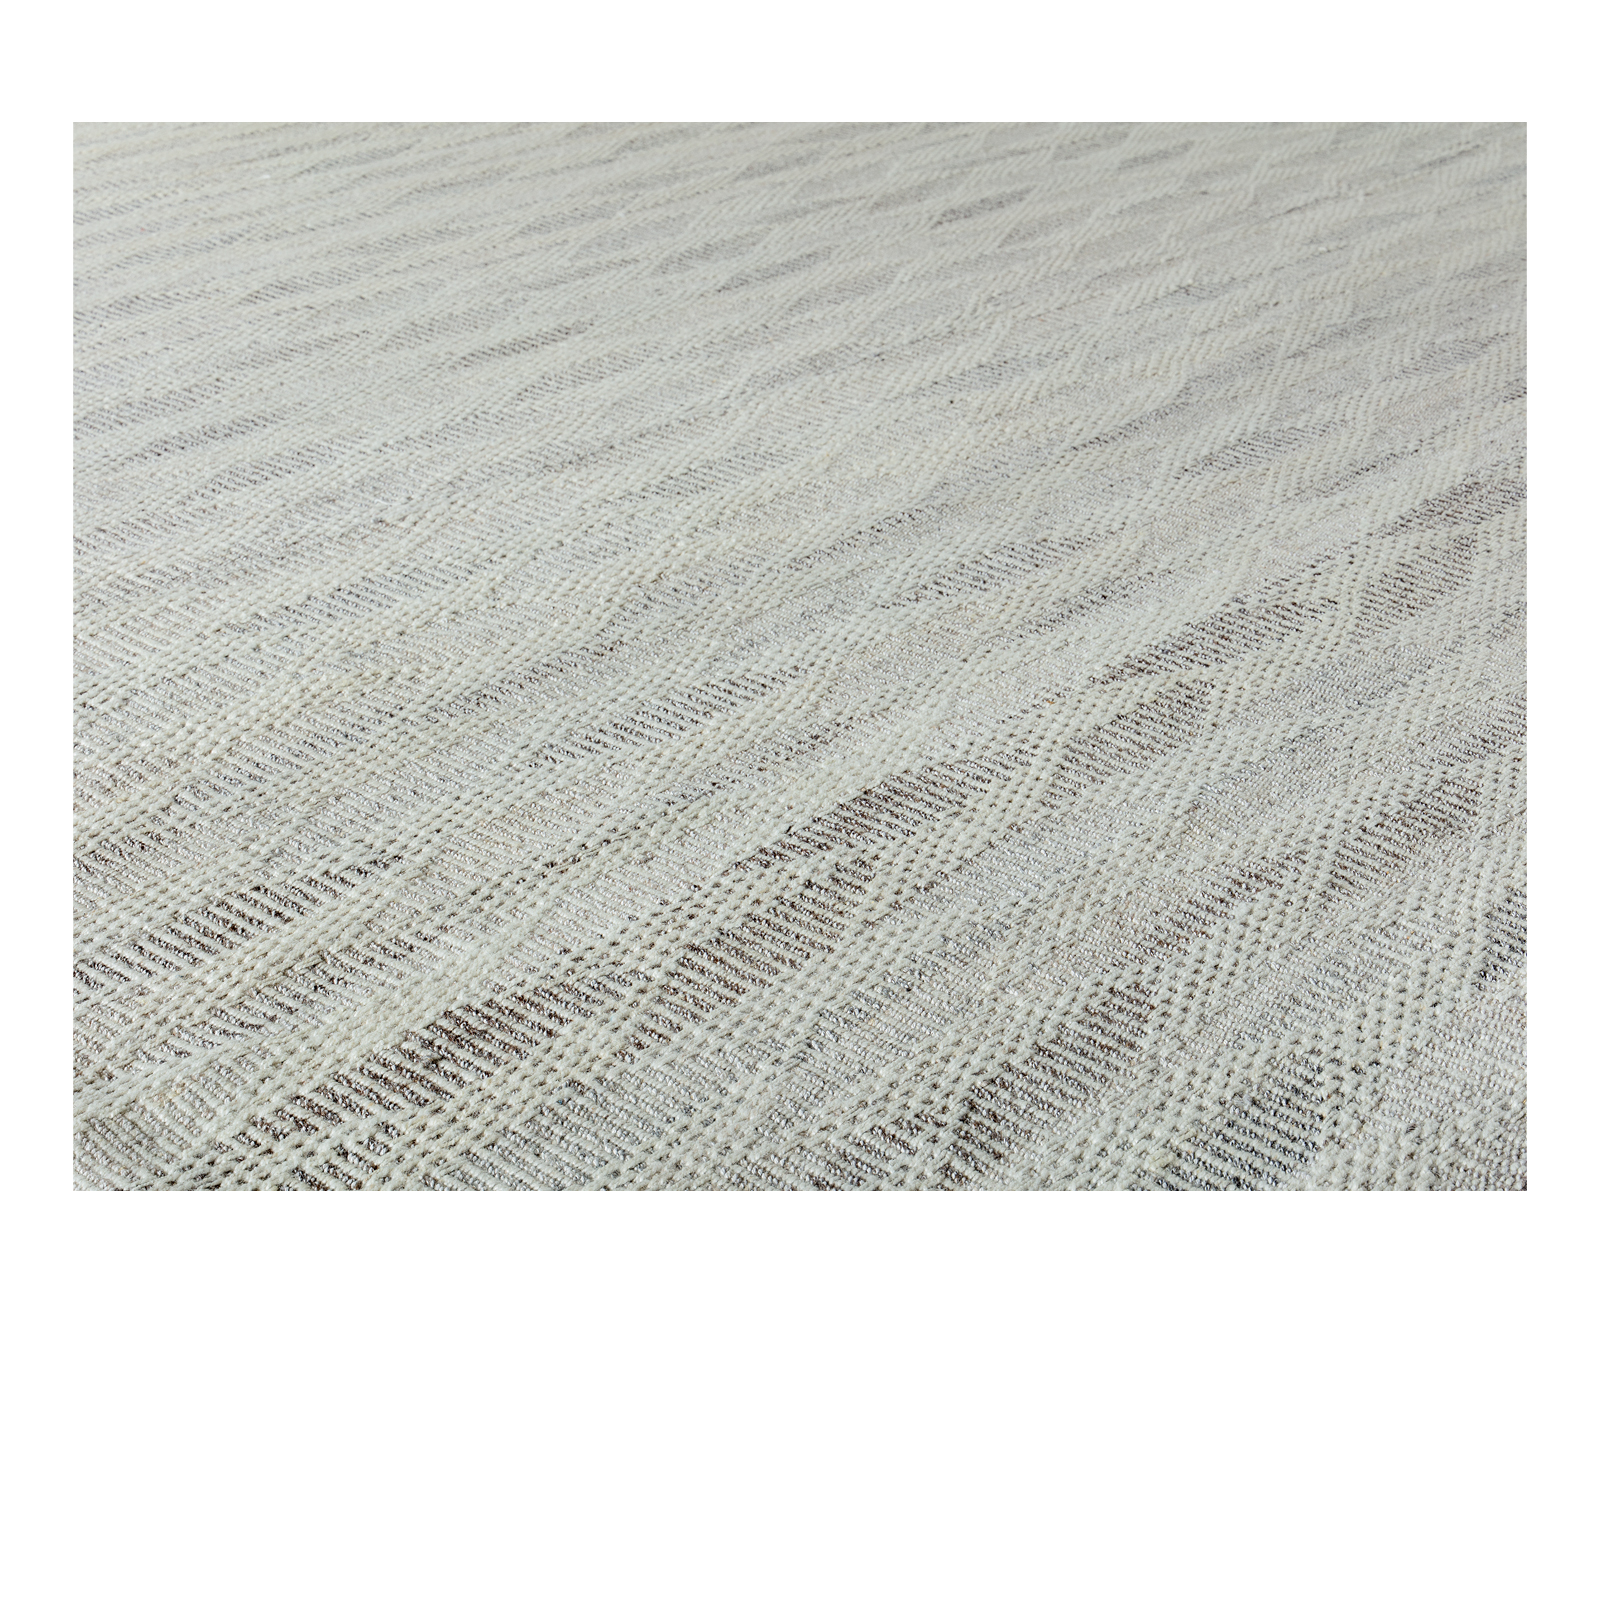 This Pelas Spearhead flatweave rug is made with handspun wool and natural dyes.